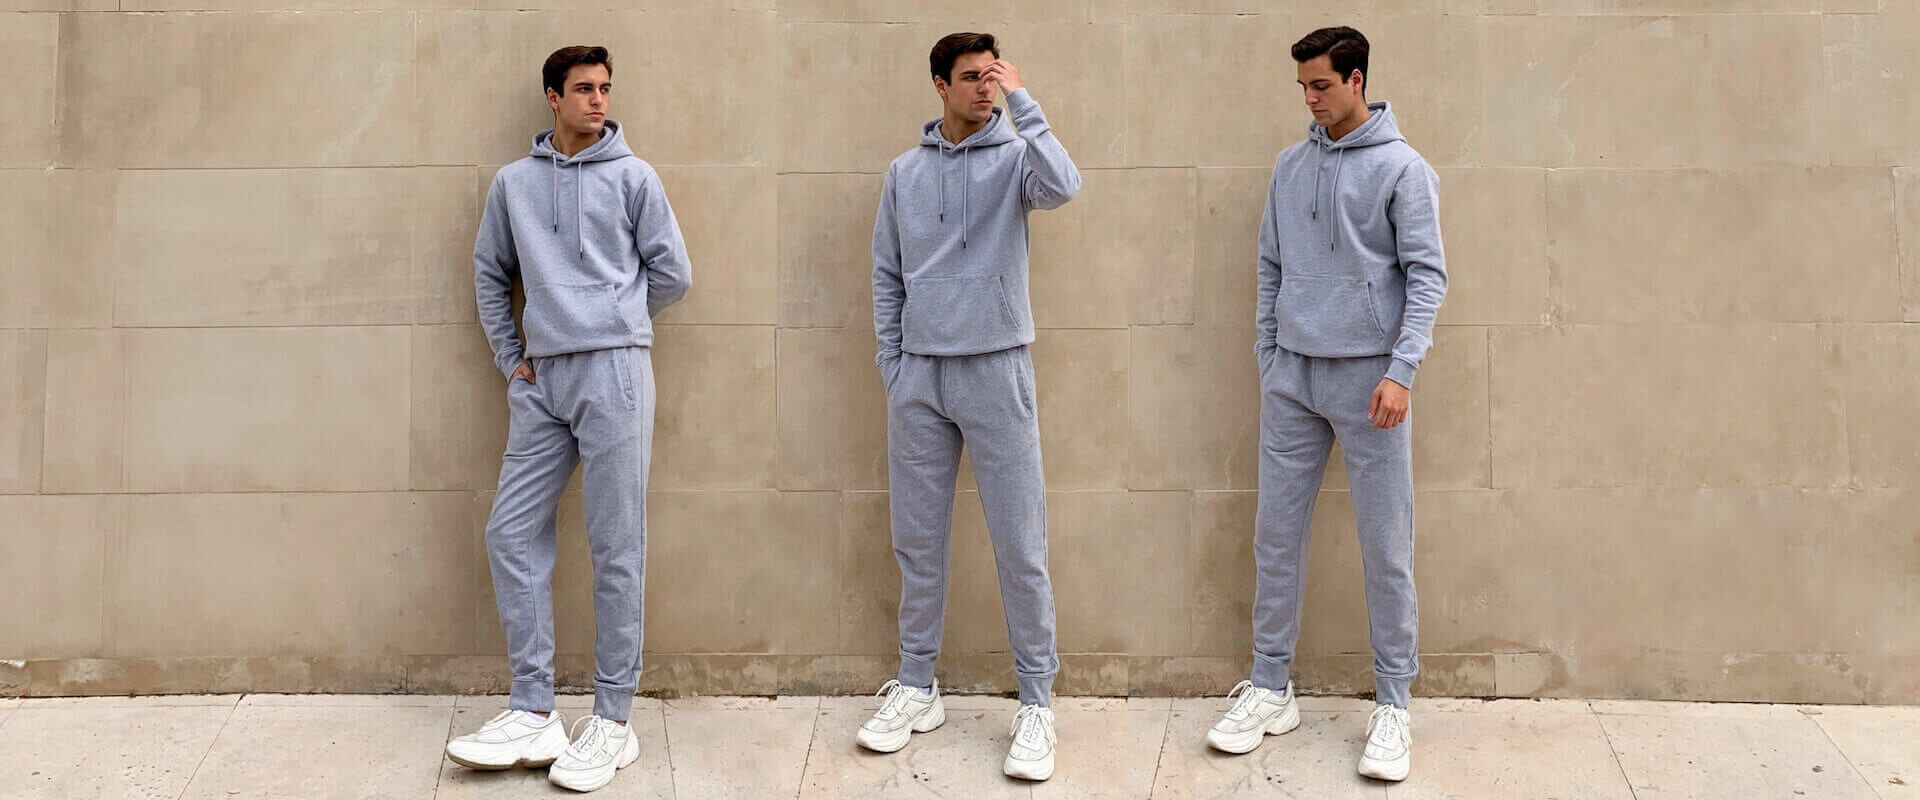 How to wear Sweatpants  Outfits & style ideas for Men